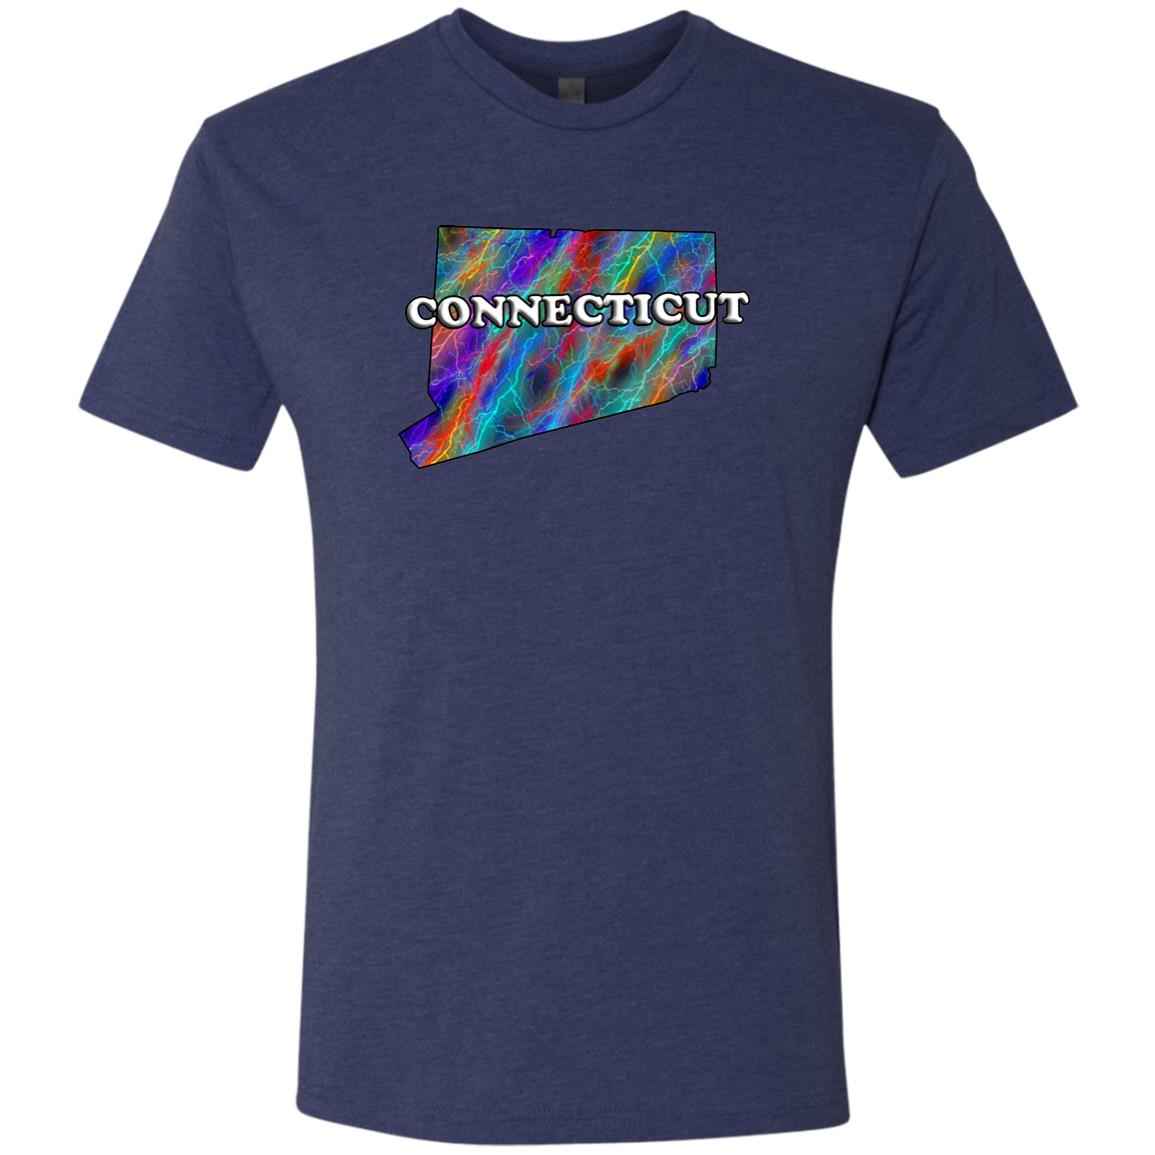 Connecticut State T-Shirt